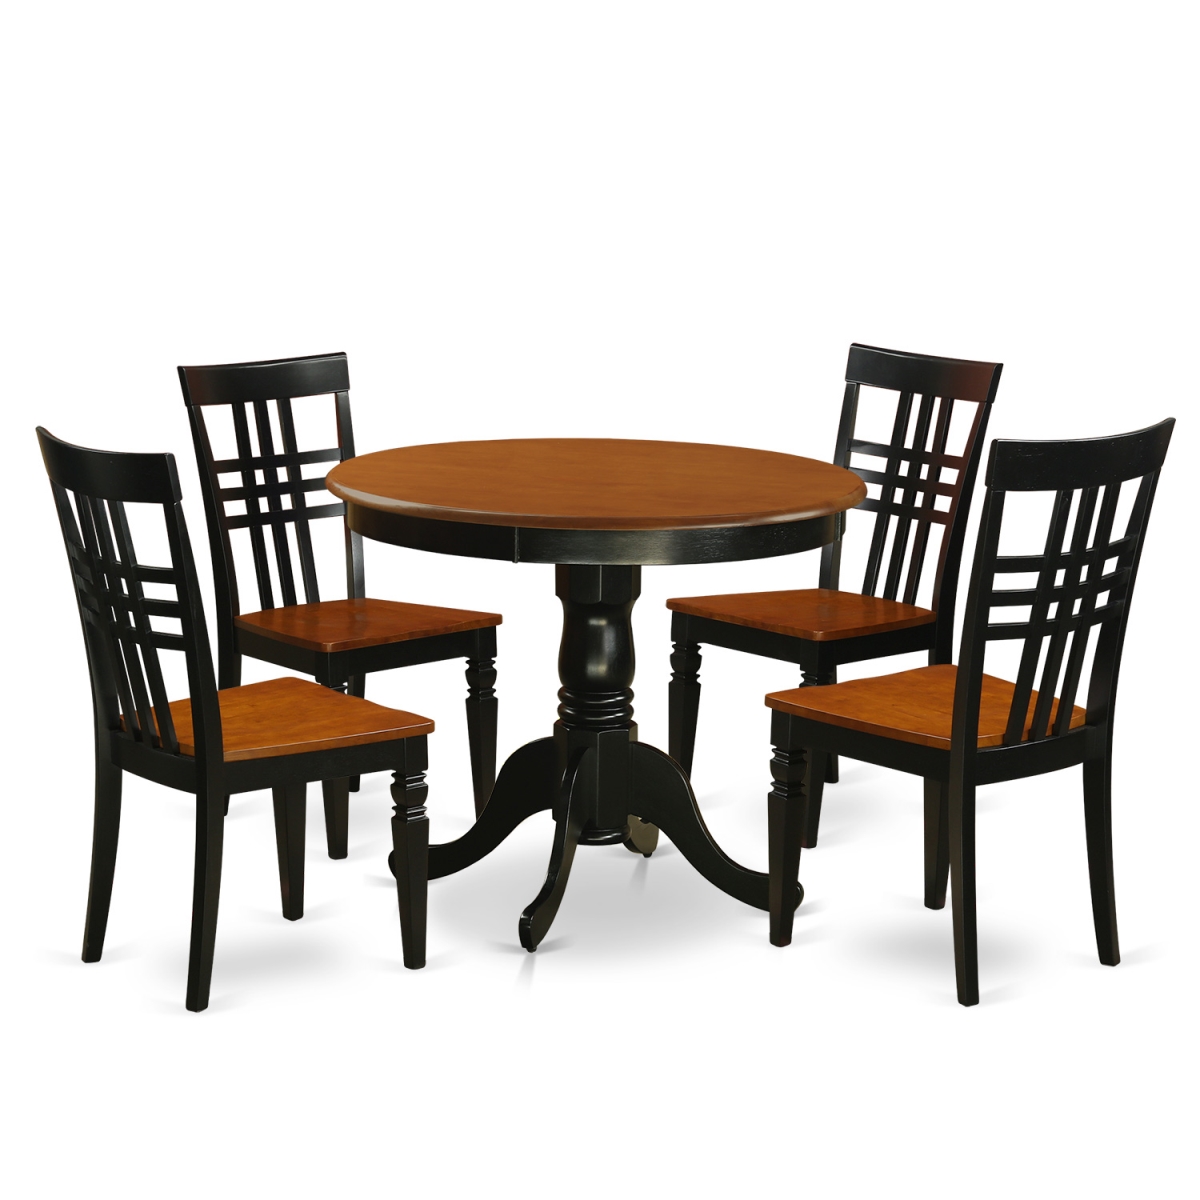 Picture of East West Furniture ANLG5-BCH-W Dining Room Set with One Table & Four Chairs, Black & Cherry - 5 Piece